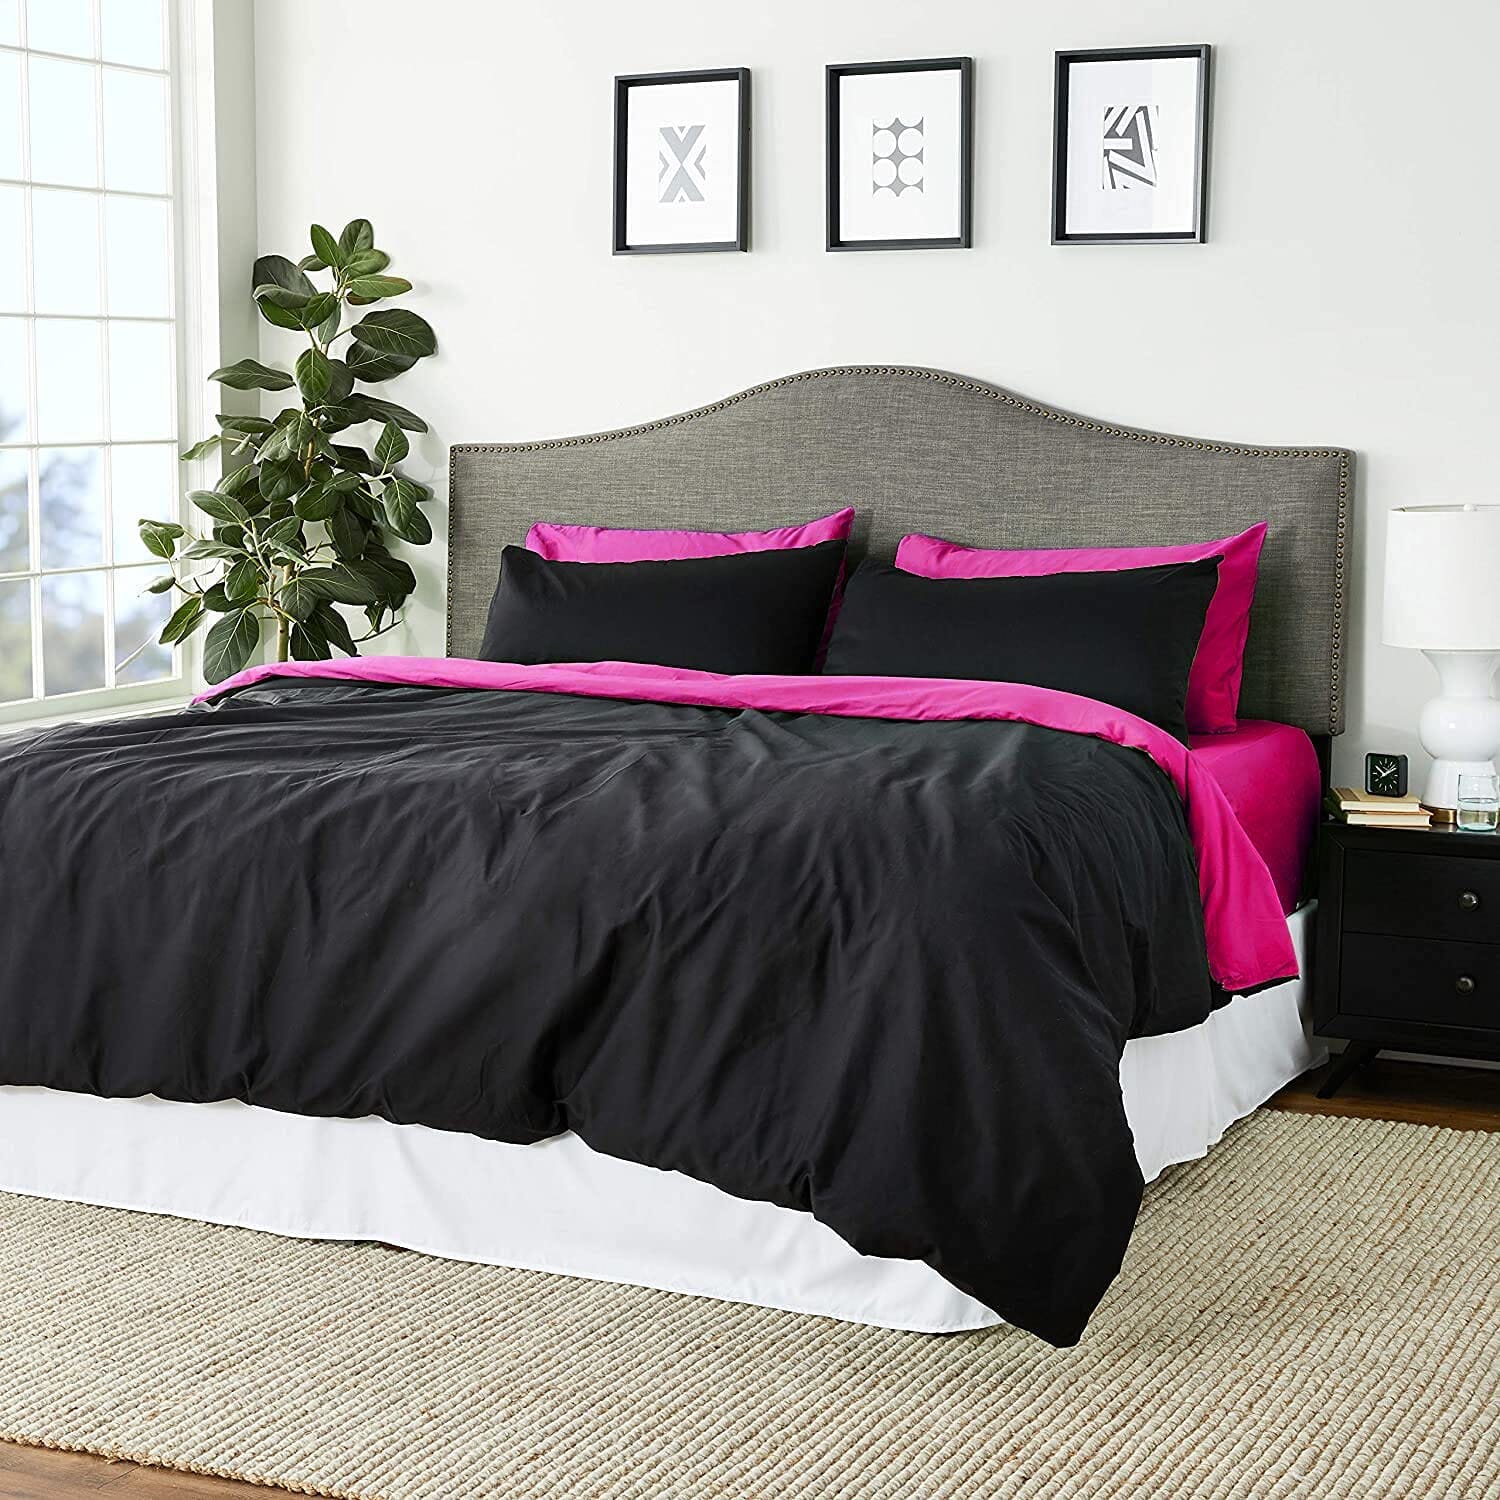 Tache Cotton Hot Pink Black Reversible Comforter Set With Zipper Closed Removeable Cover Girls Girly